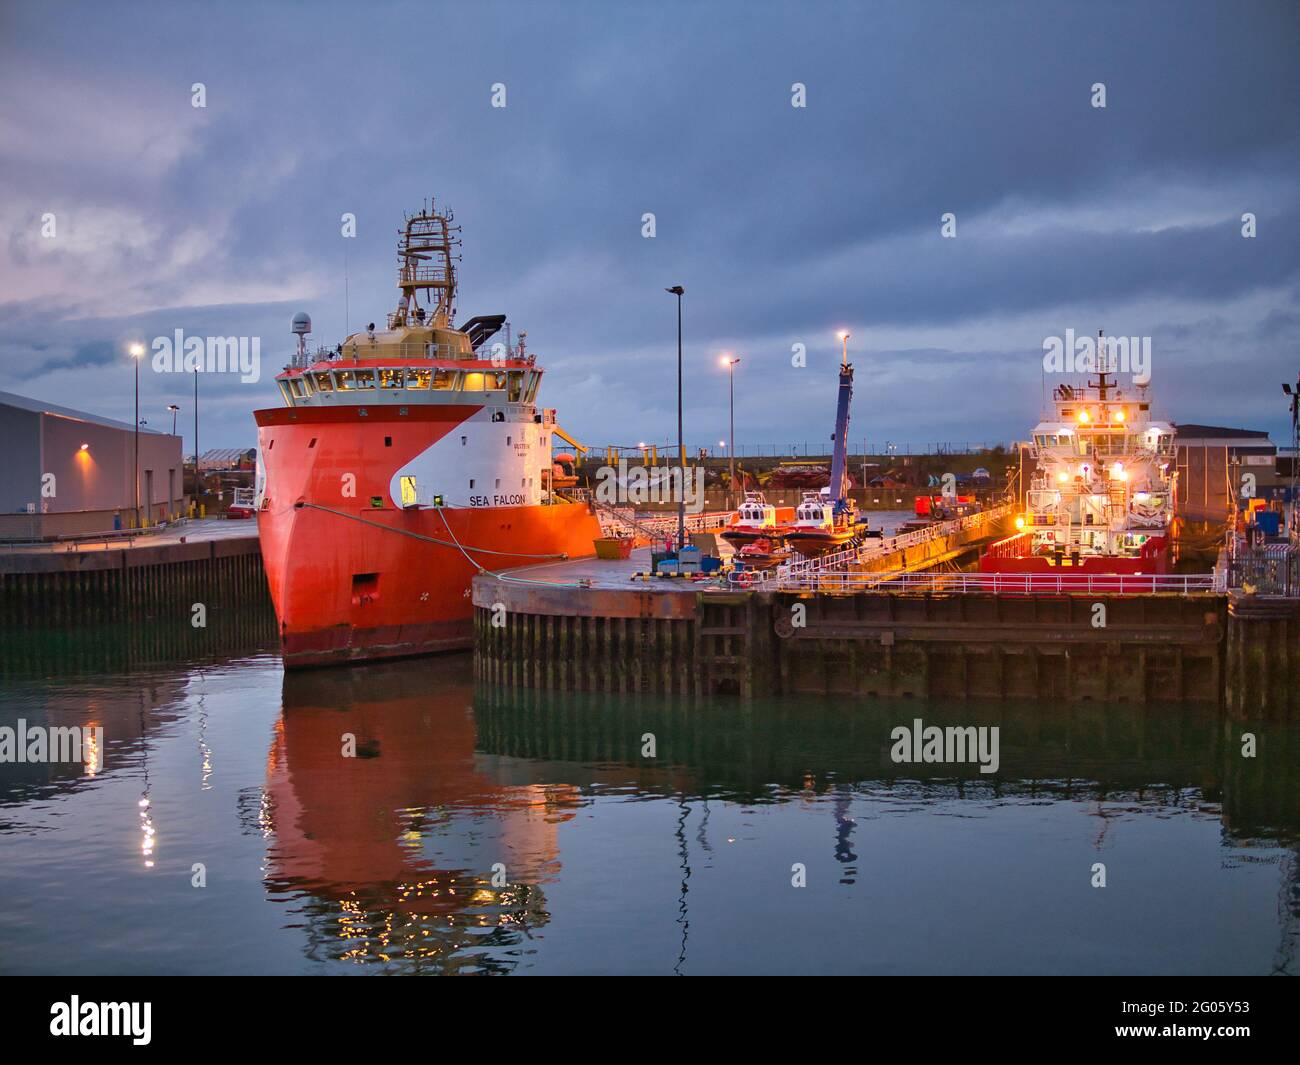 Cyprus flagged Sea Falcon berthed in the port of Aberdeen, Scotland, UK - this vessel is an Offshore Tug and Supply Ship built in 2013. Stock Photo